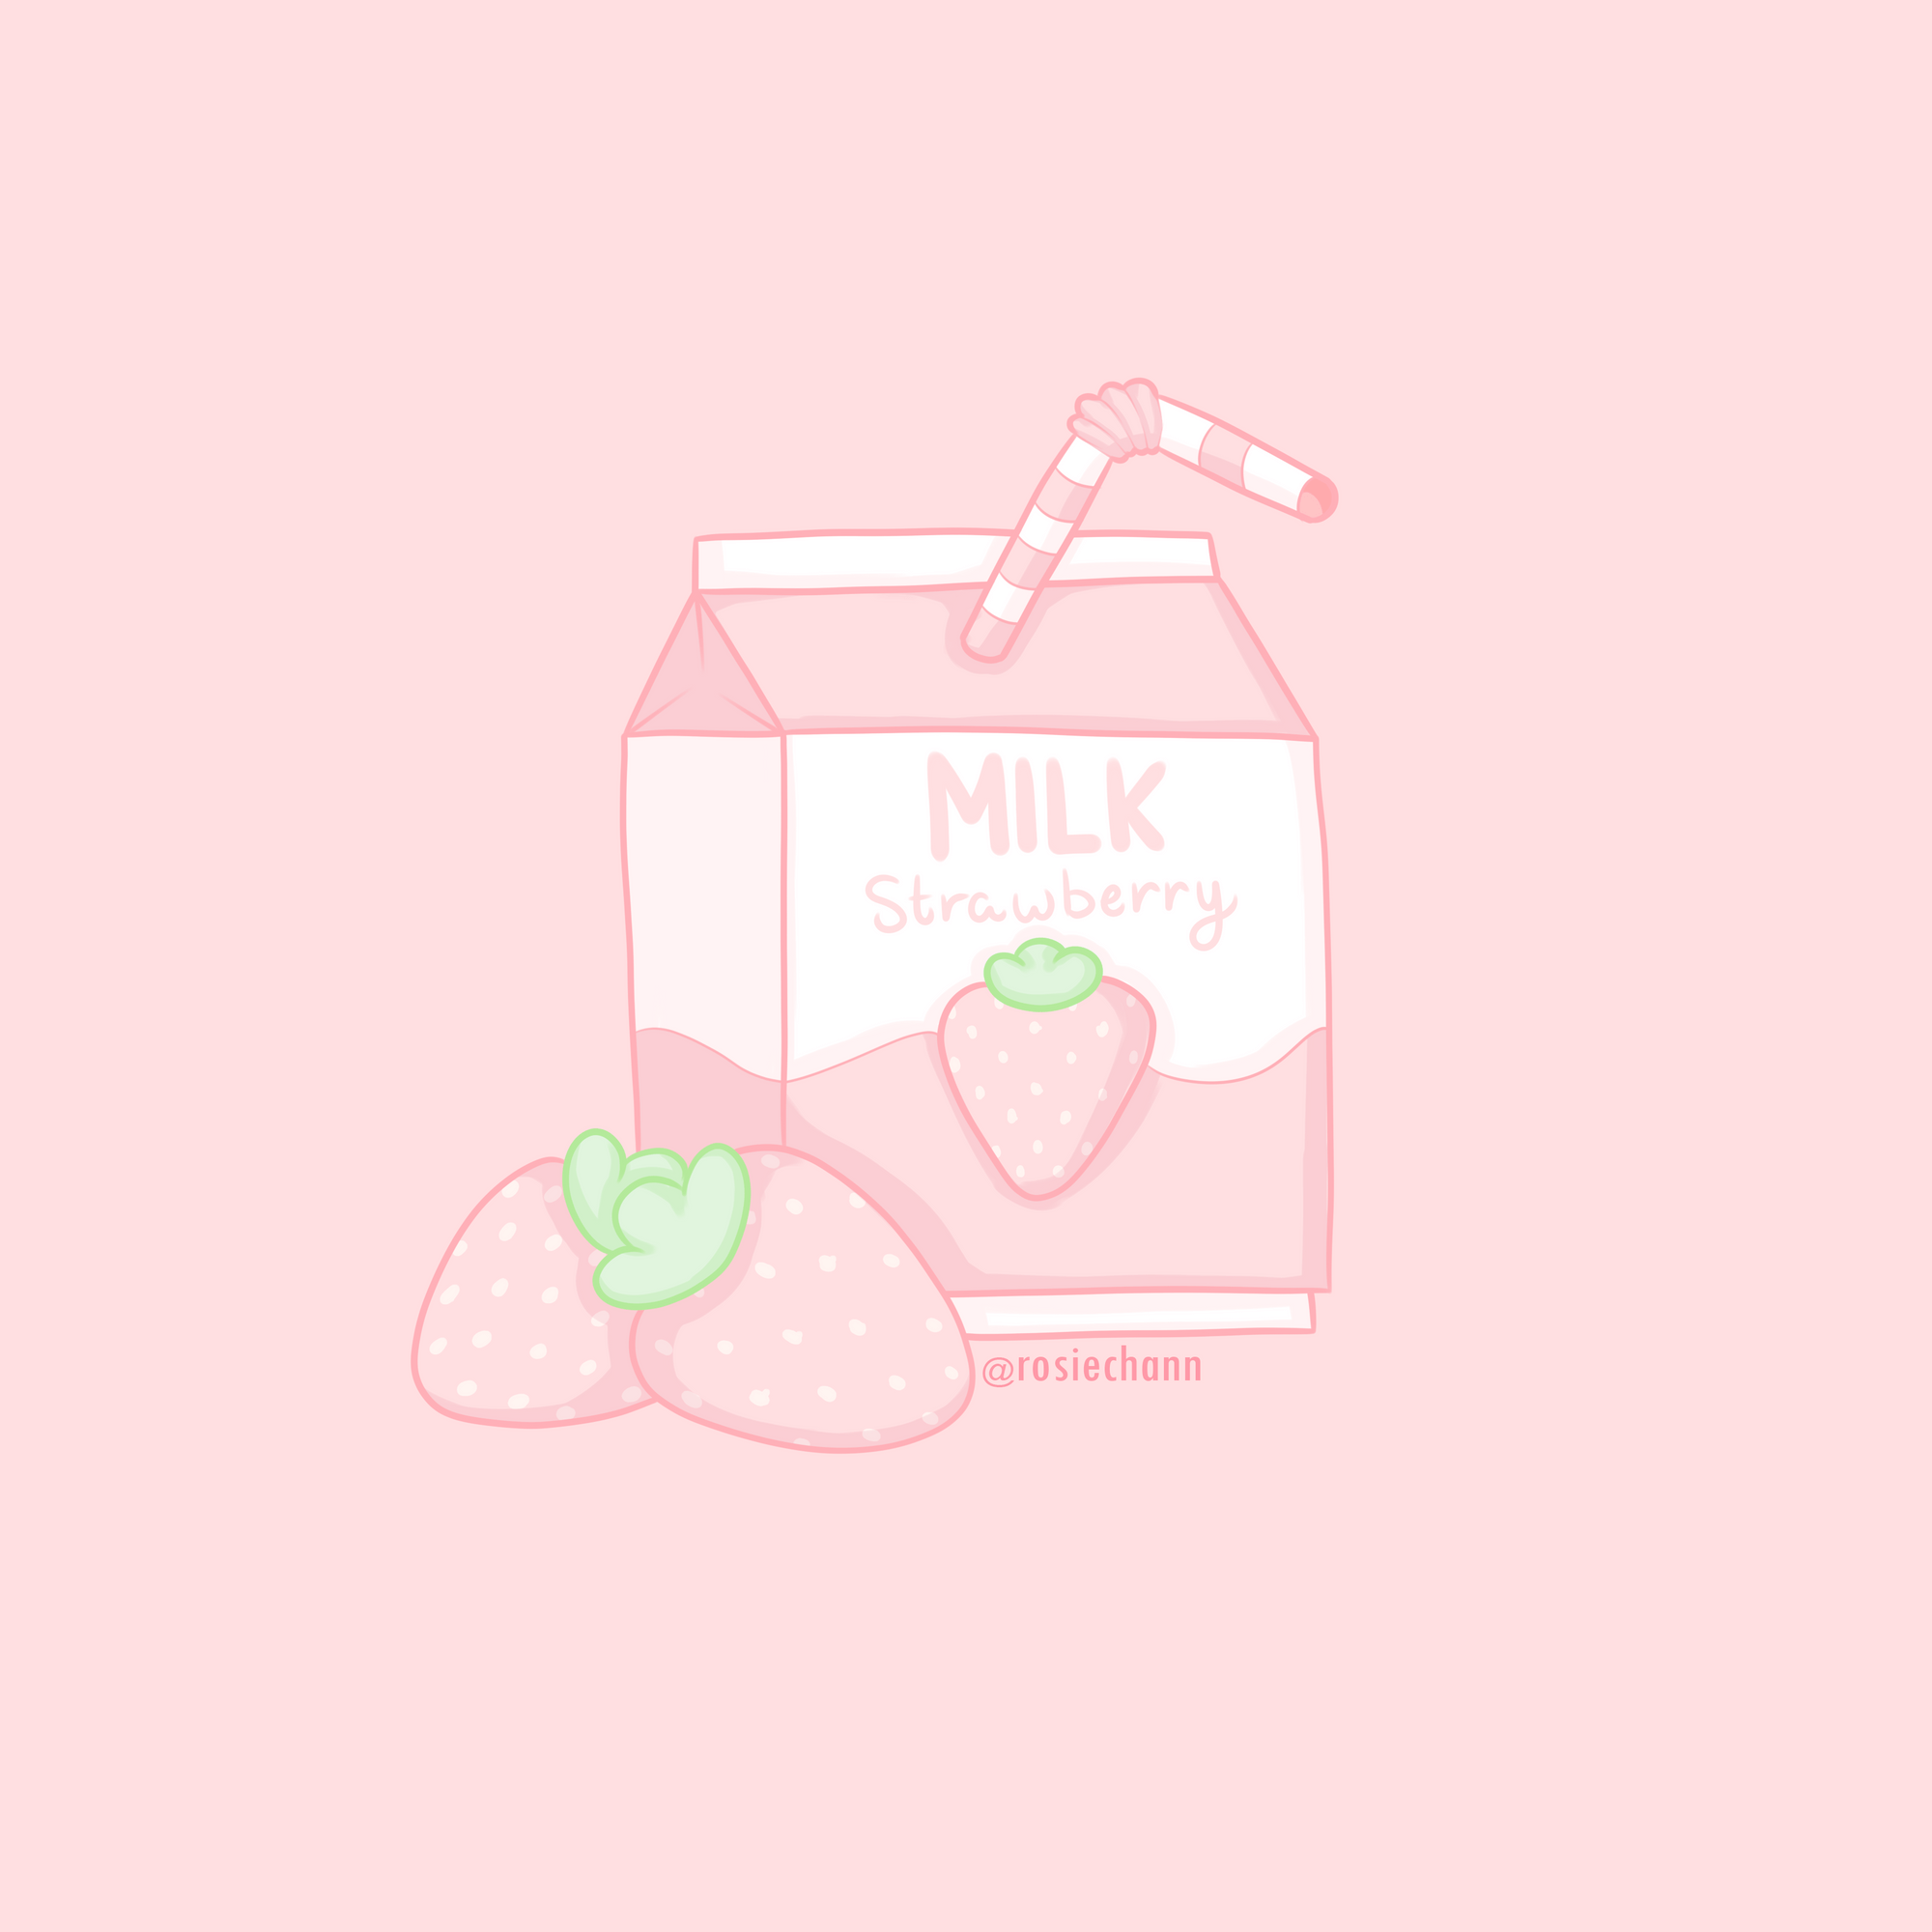 A pink strawberry milk carton with a green heart on the bottom left of the carton. - Milk